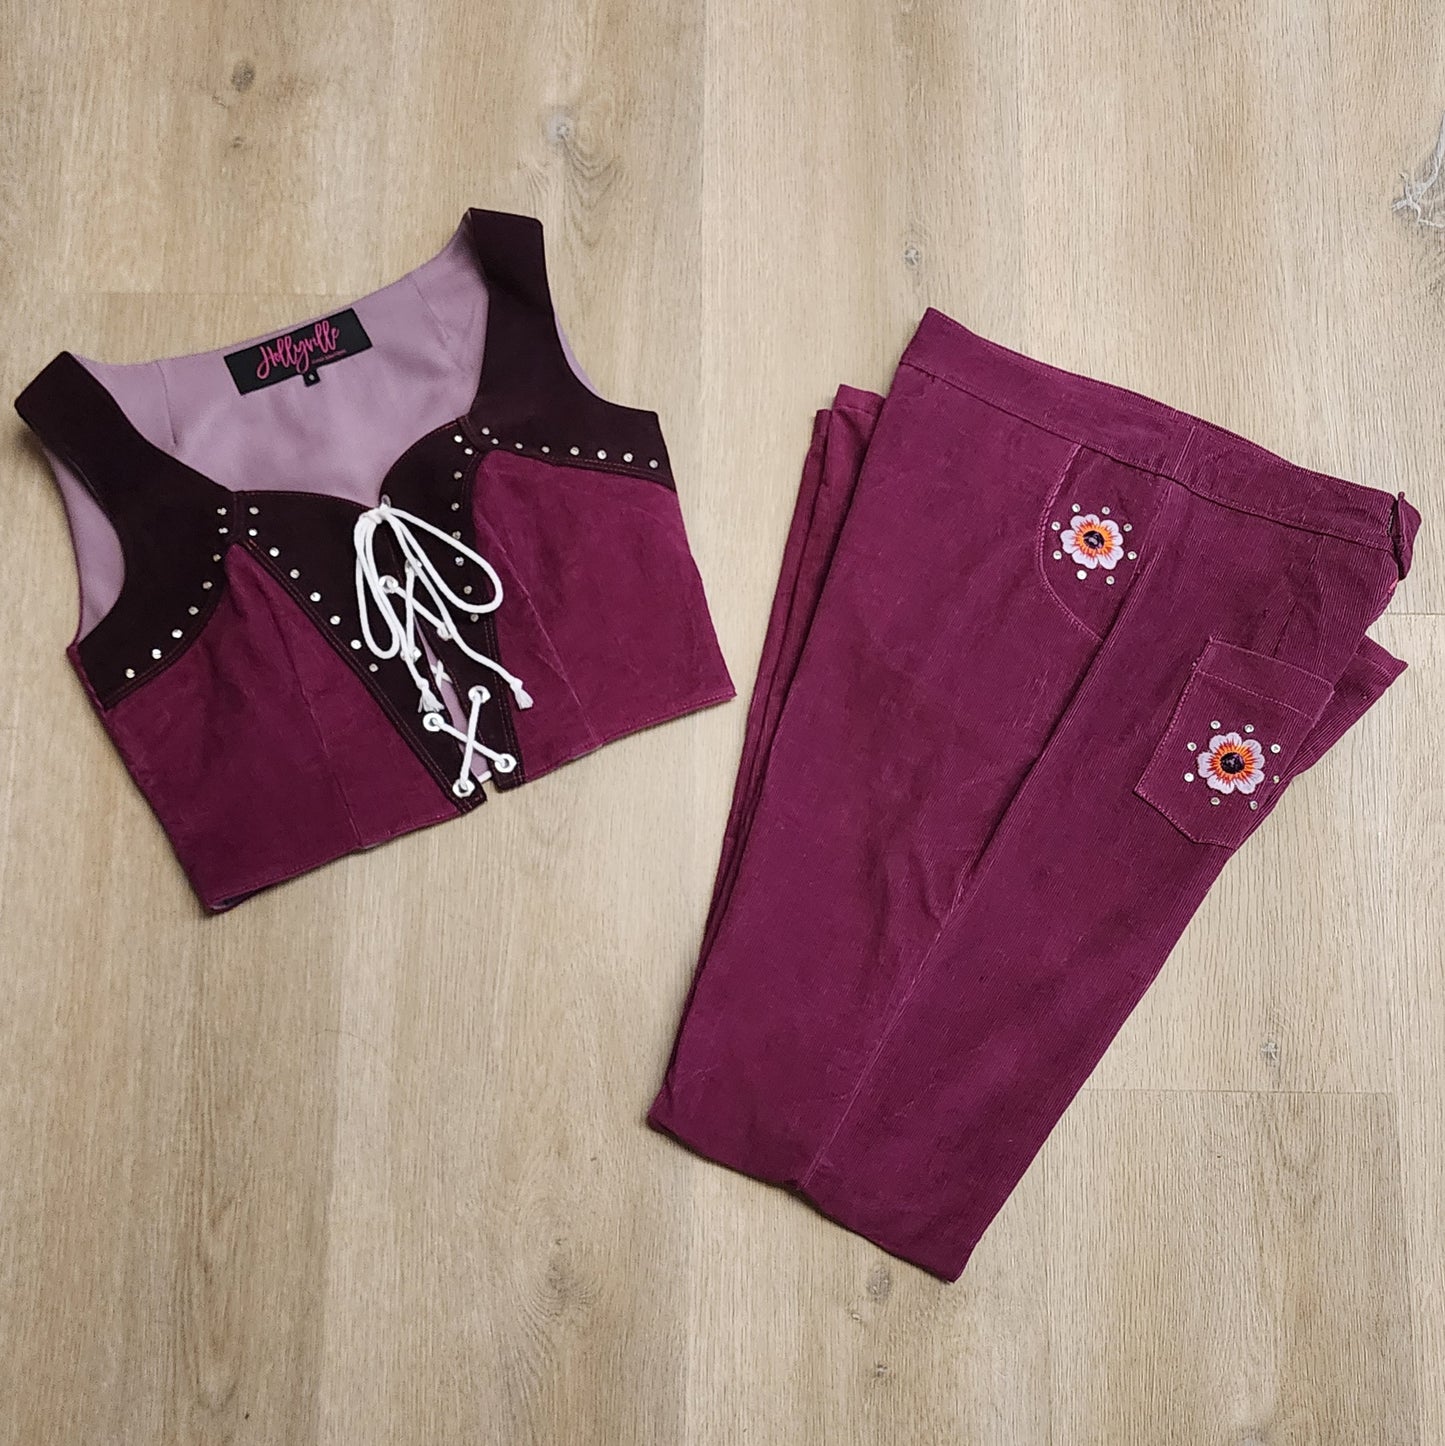 Wine Rhinestone Studded Floral Embroidered Flared Pants and Bodice Corduroy Set by Hollyville